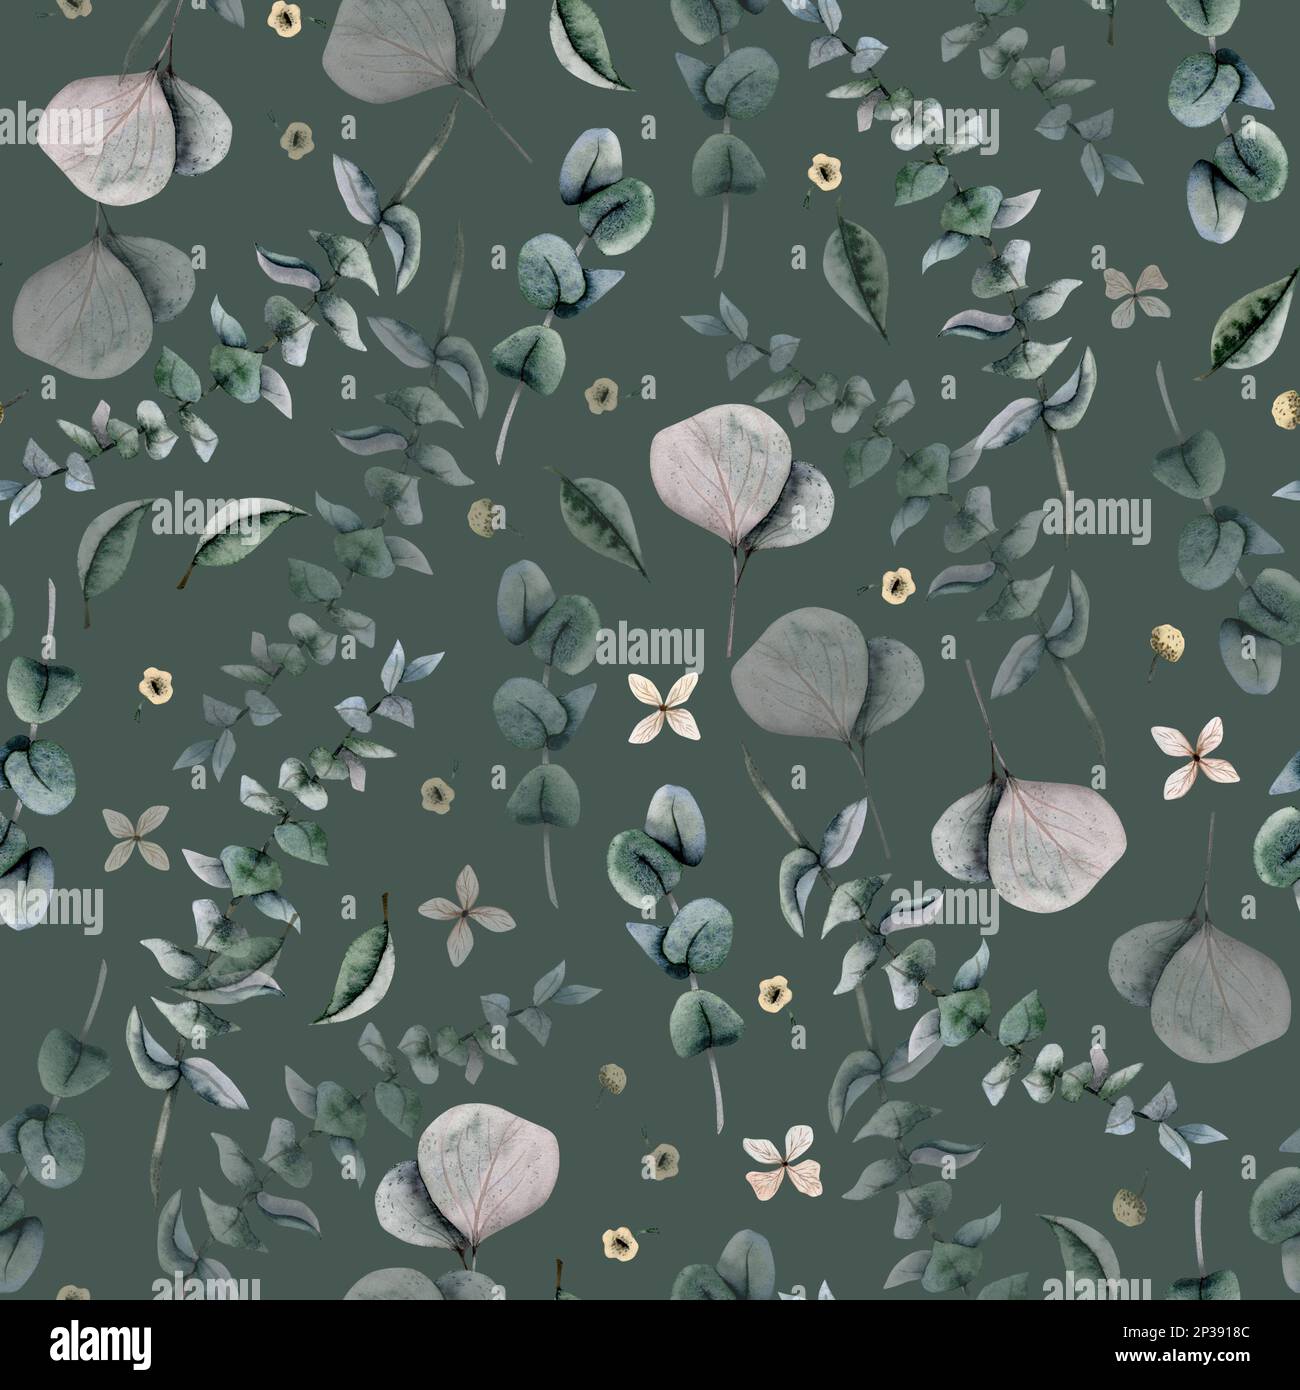 Dusty green seamless watercolor floral pattern with eucalyptus branches and flowers on dark background. Stock Photo